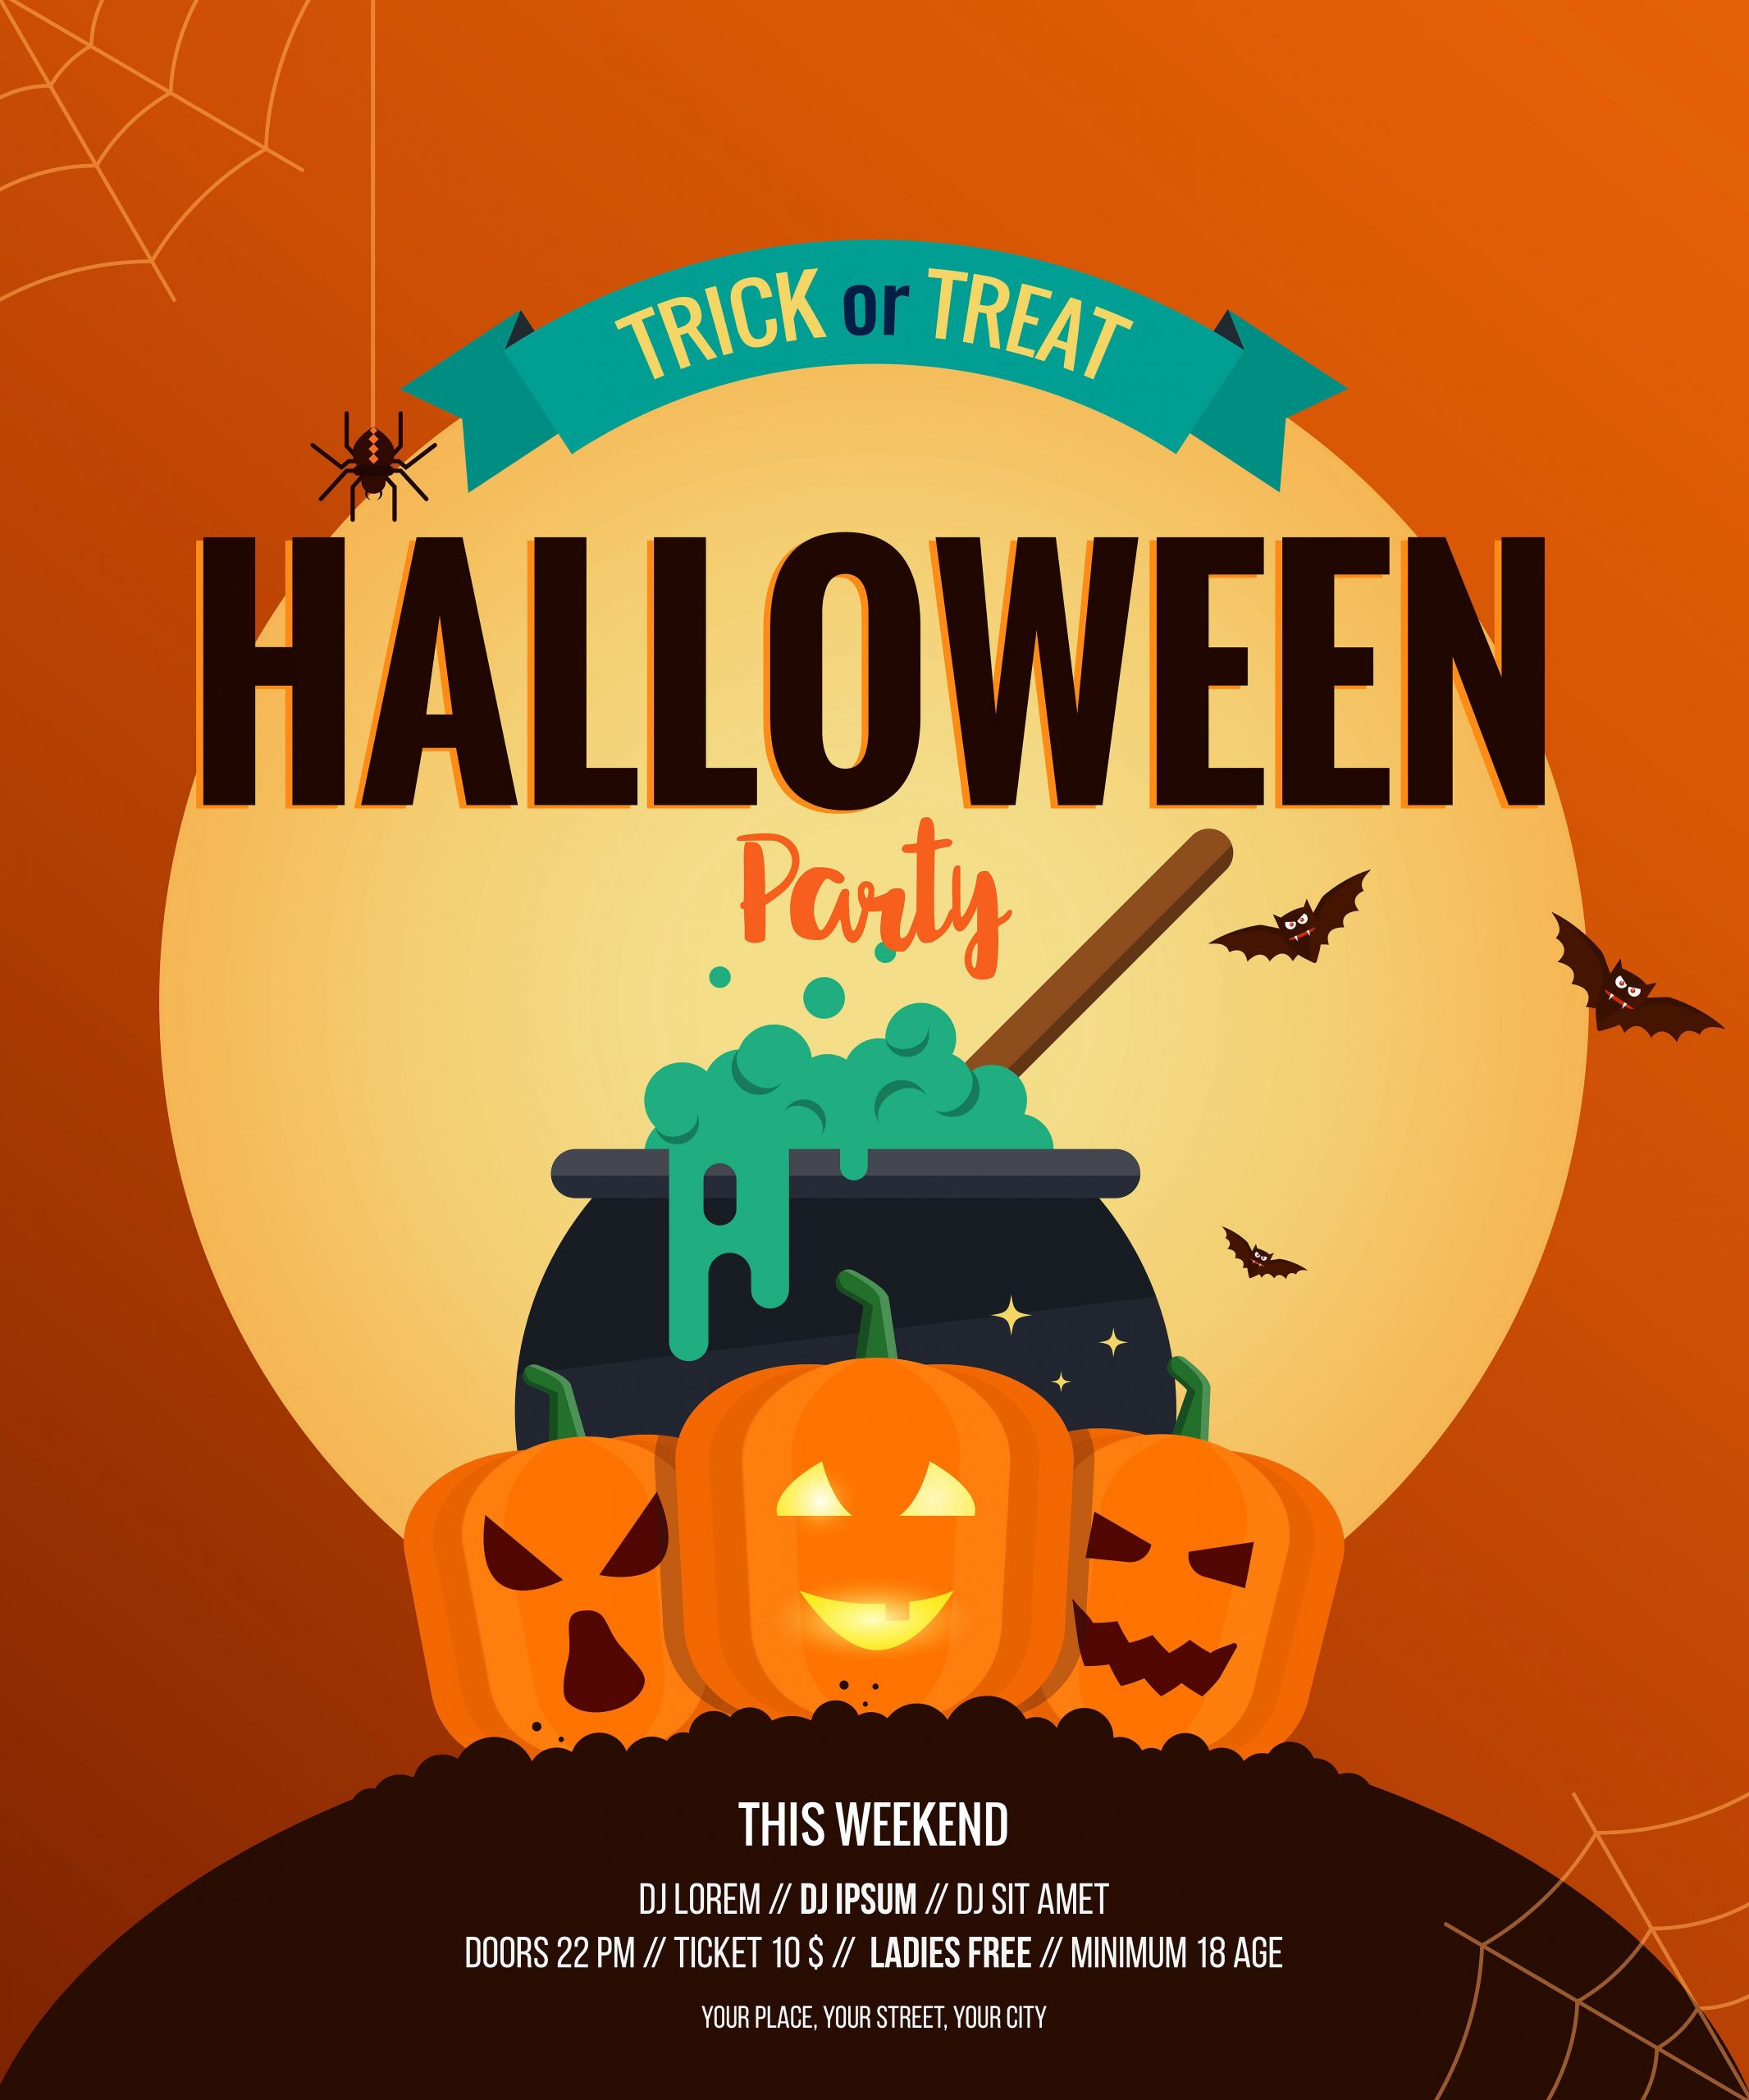 Halloween Party Poster Ideas
 Two Halloween posters Flat design by Creative Graphics on